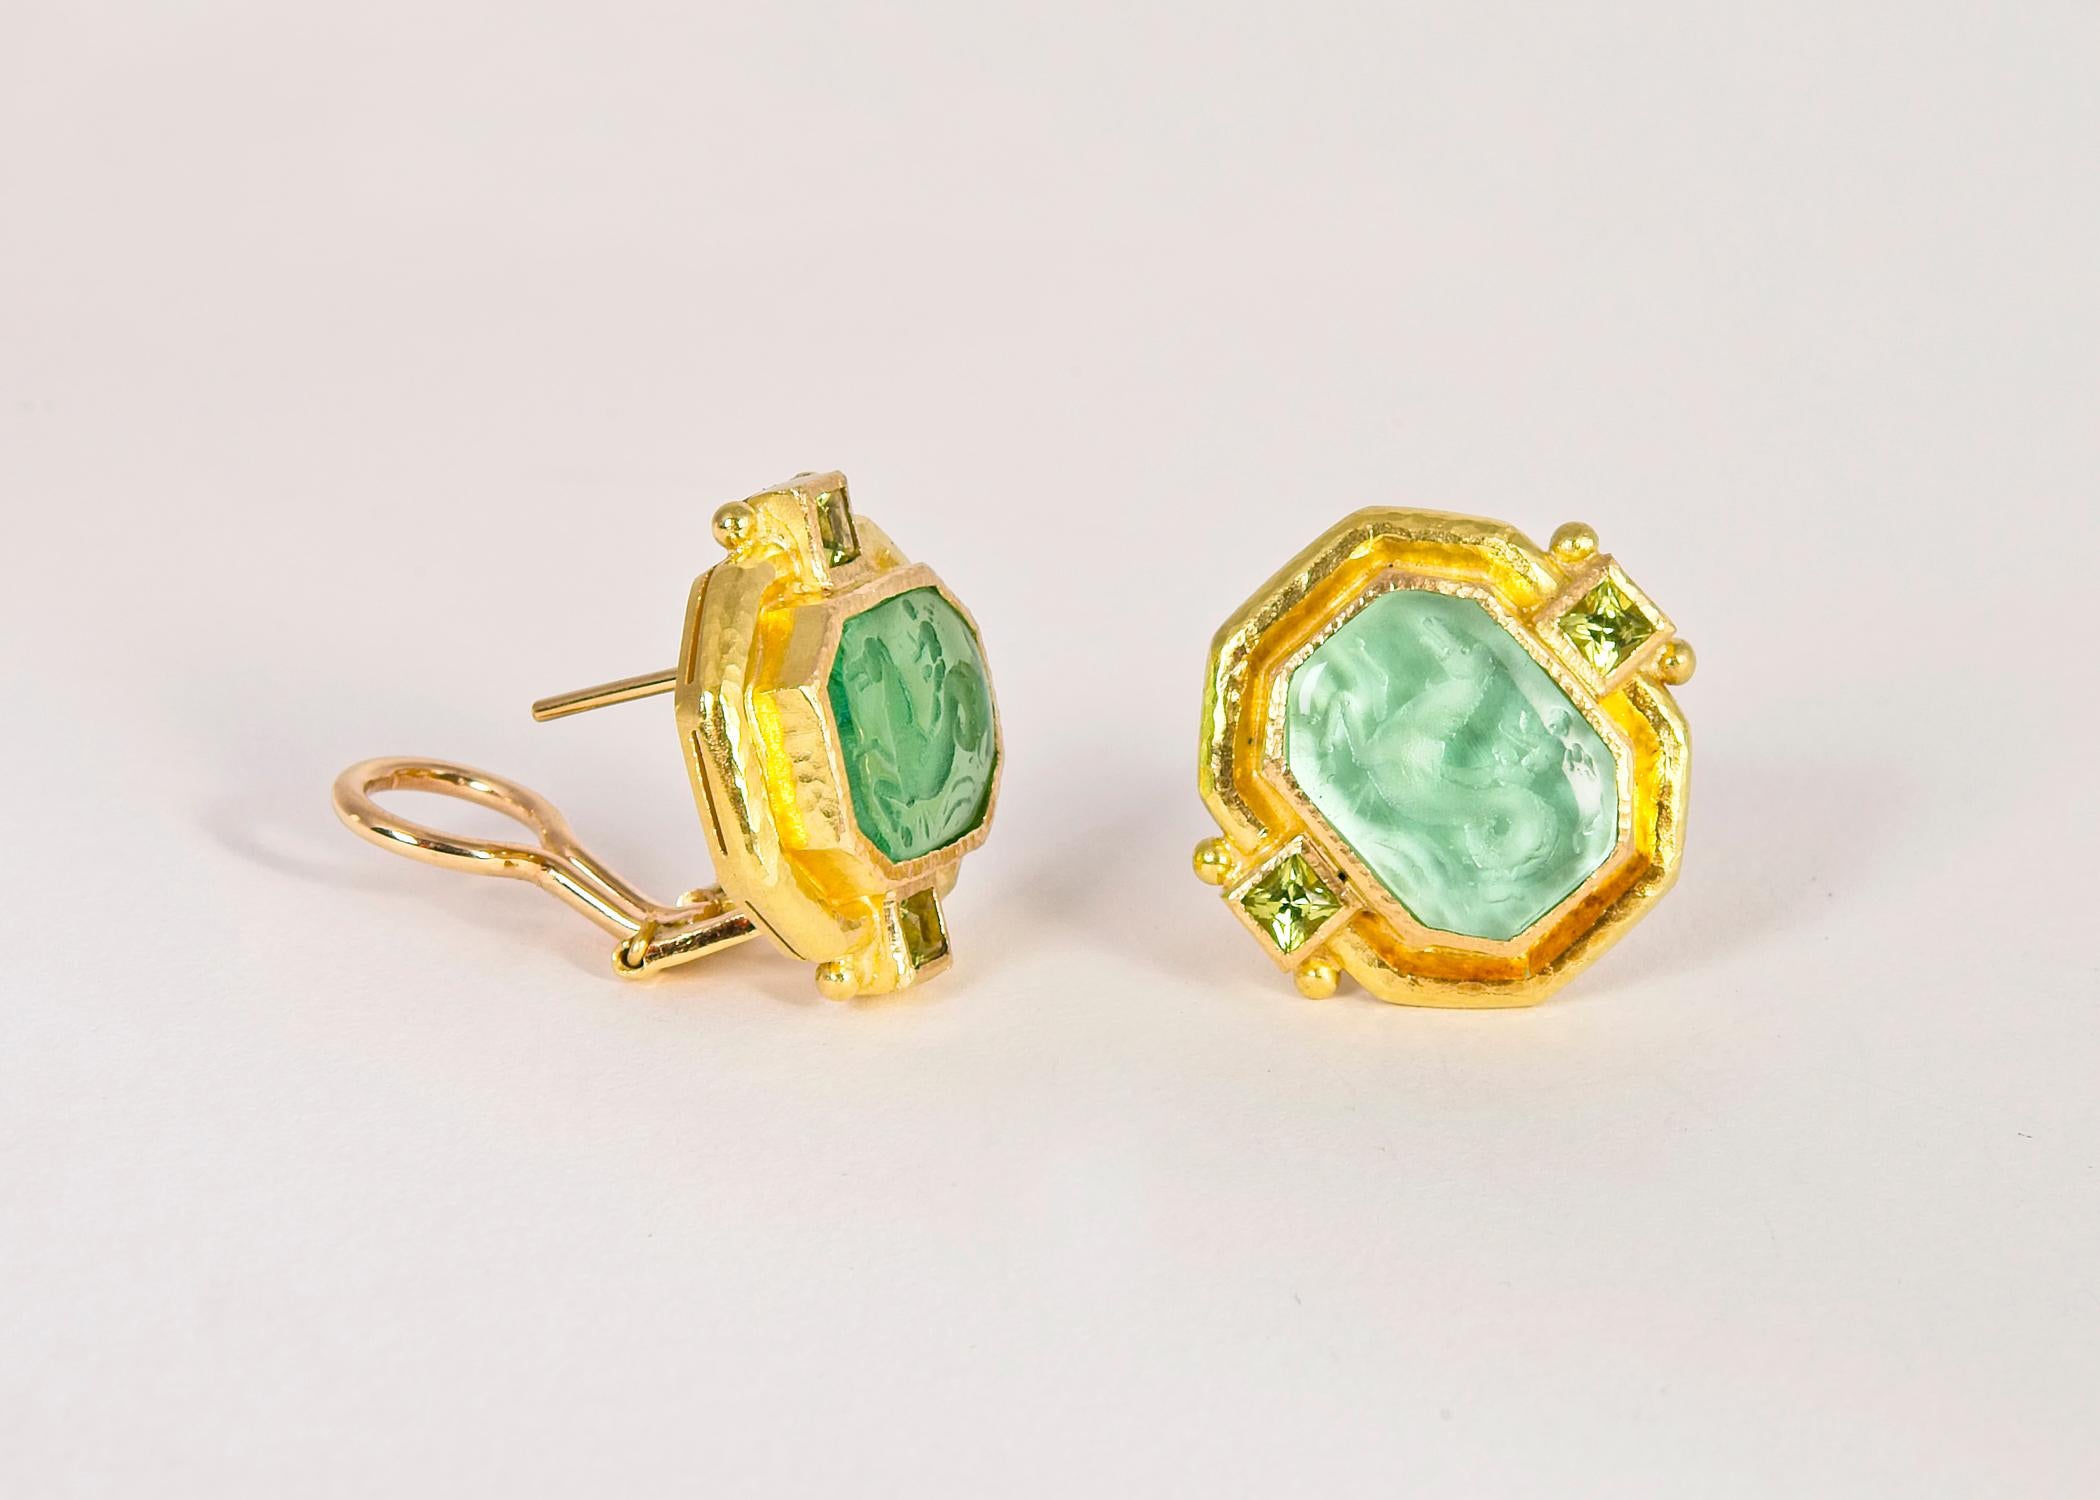 Elizabeth Locke features an equestrian motif Venetian glass center and frames it with her signature textured gold accented with faceted peridots. 7/8's of an inch in size. 